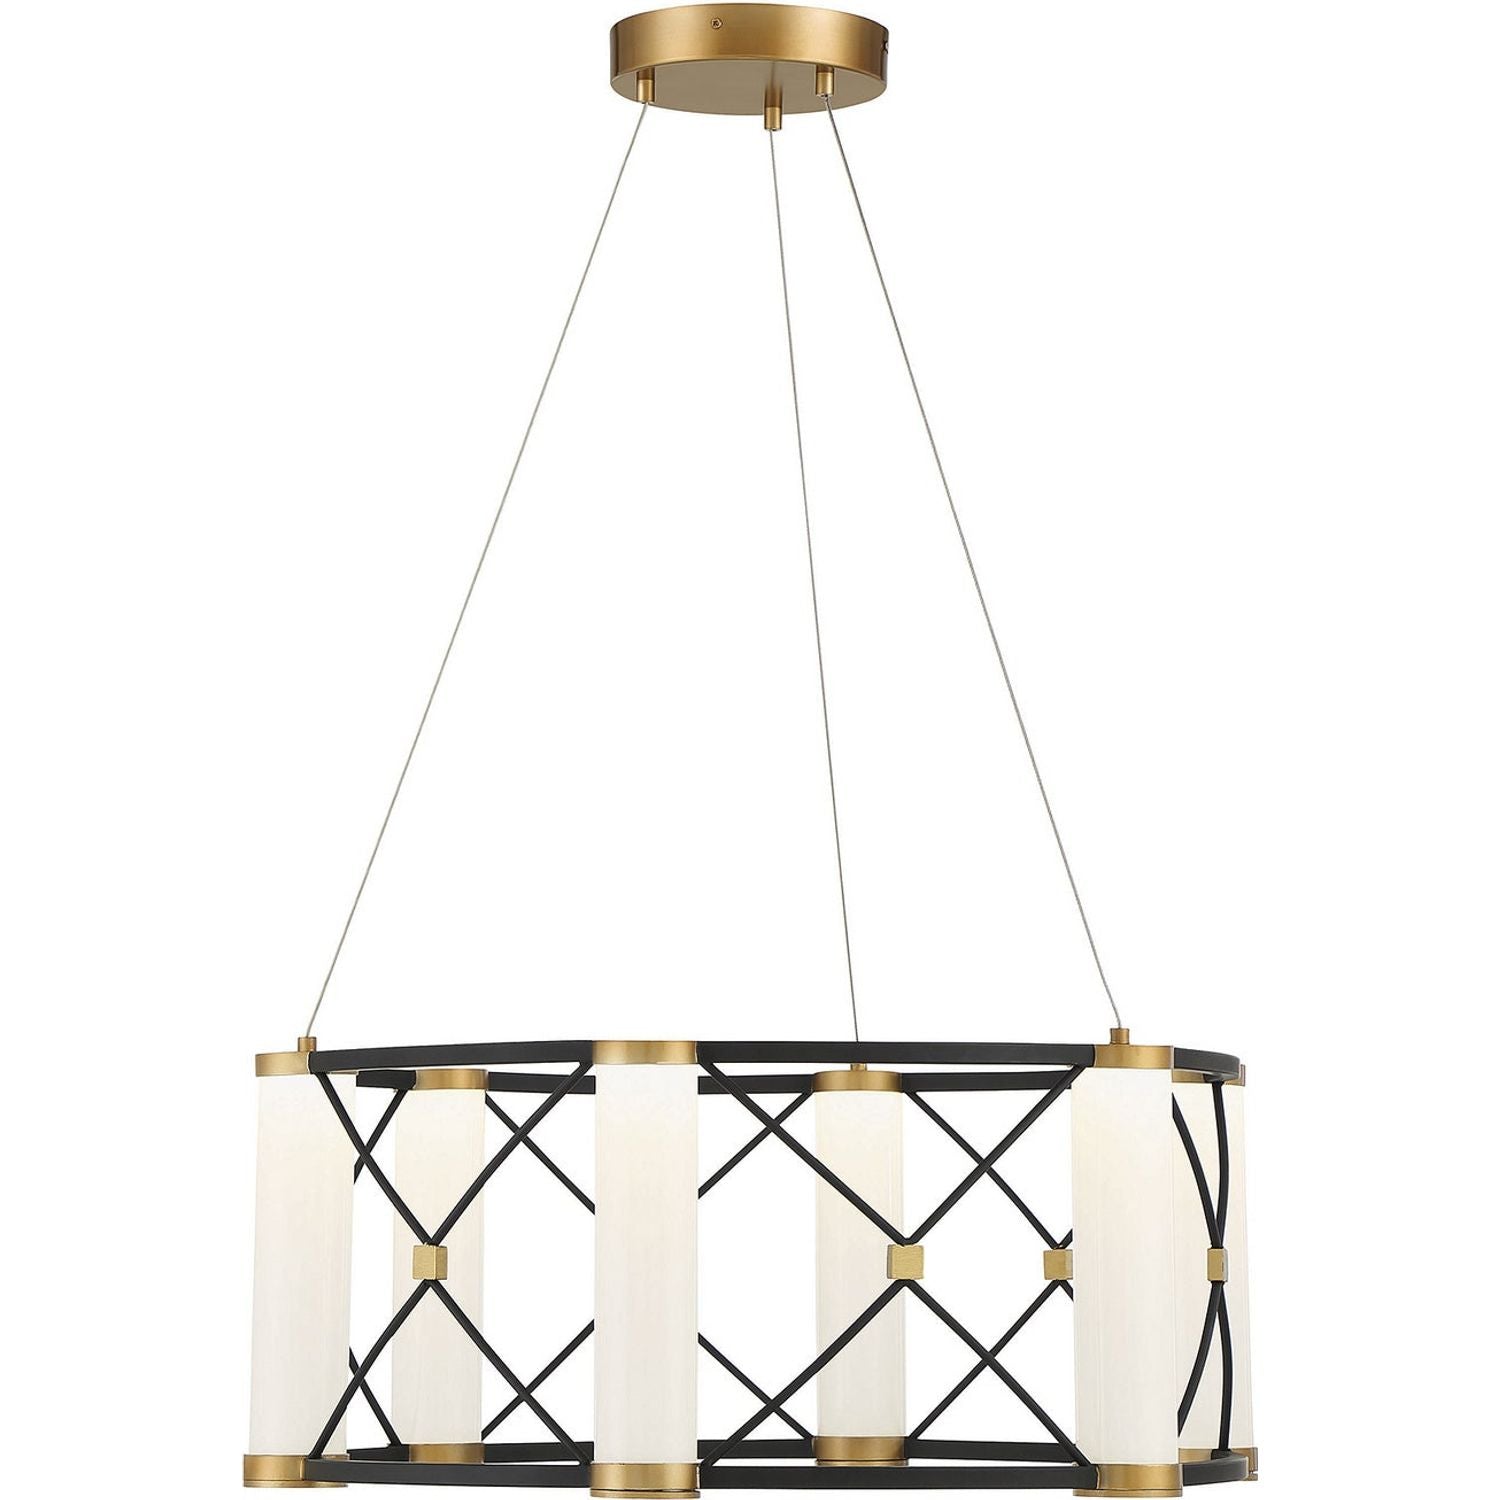 Savoy House - 7-1639-6-144 - LED Pendant - Aries - Matte Black with Burnished Brass Accents